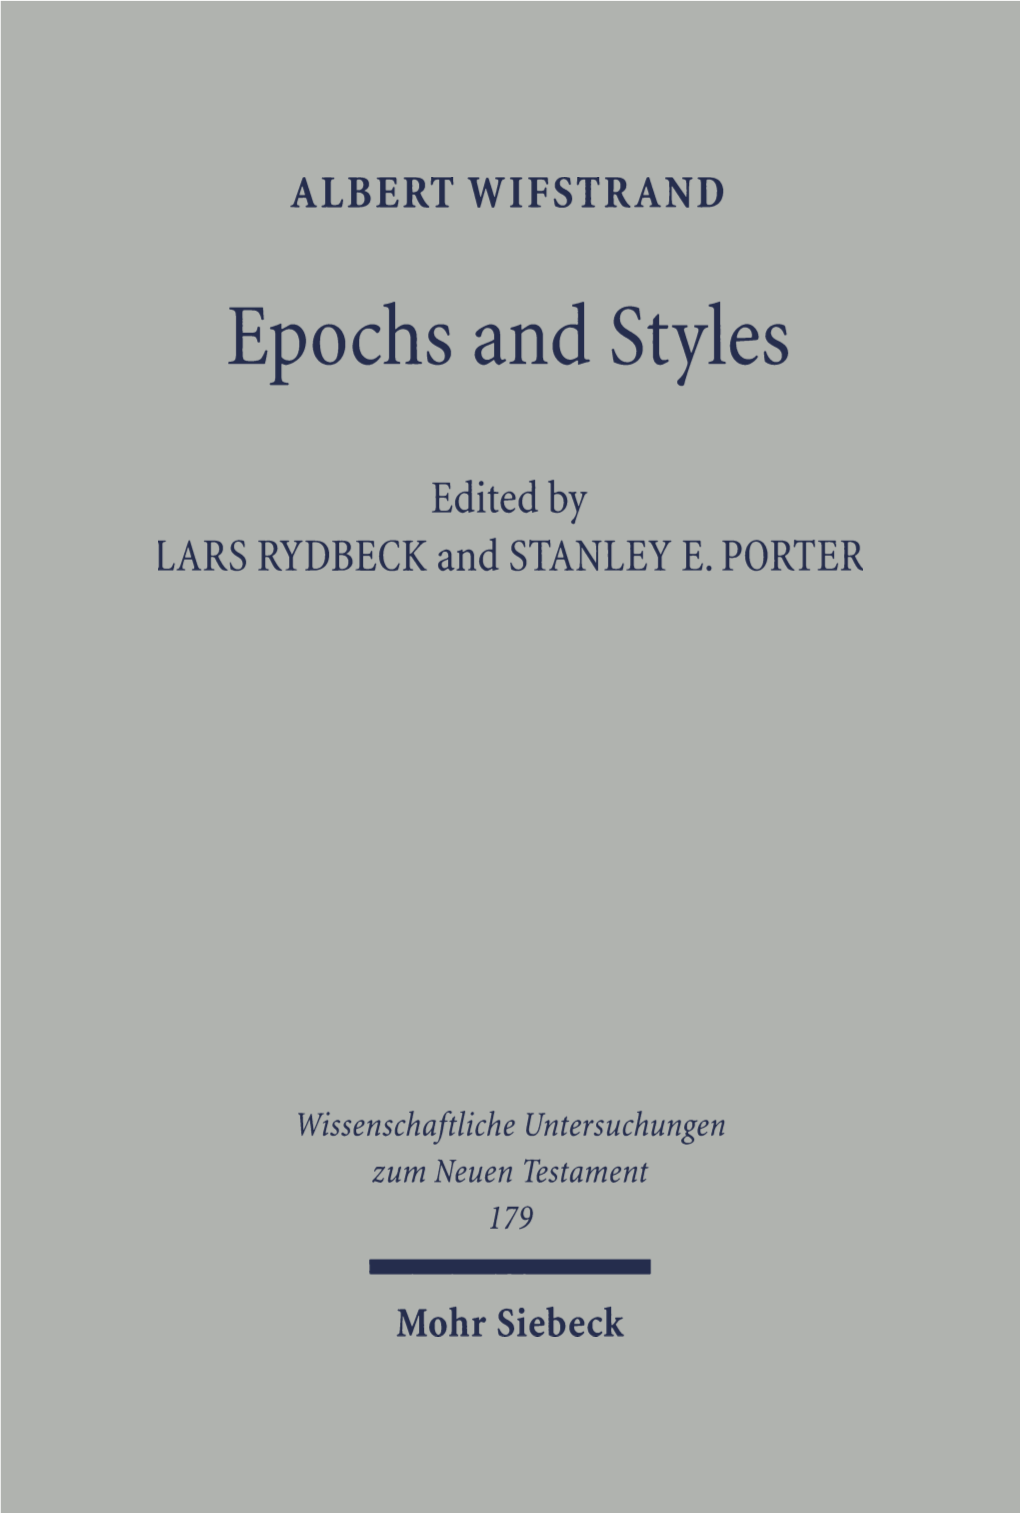 Epochs and Styles. Selected Writings on the New Testament, Greek Language and Greek Culture in the Post-Classical